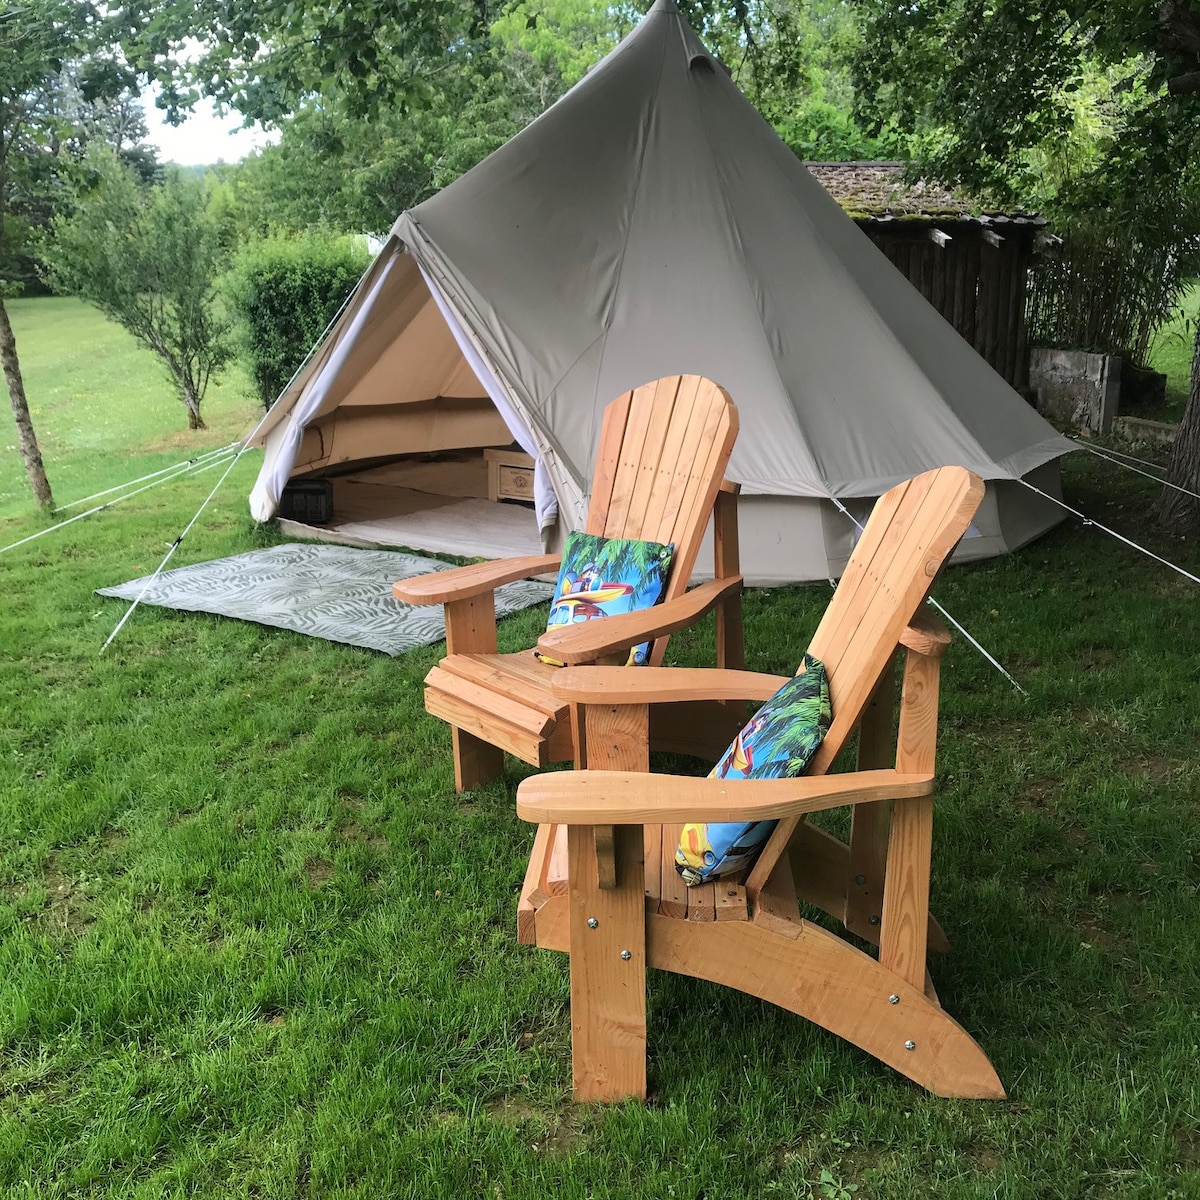 Dordogne Glamping "Bell Tent" up to 2 people